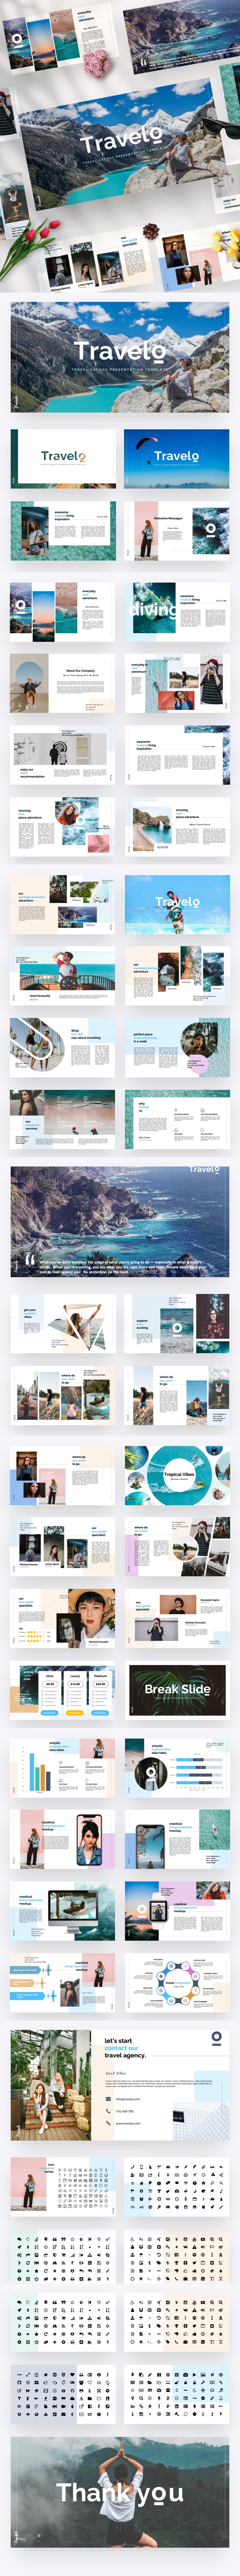 Travelo - Travel Agency Powerpoint Template